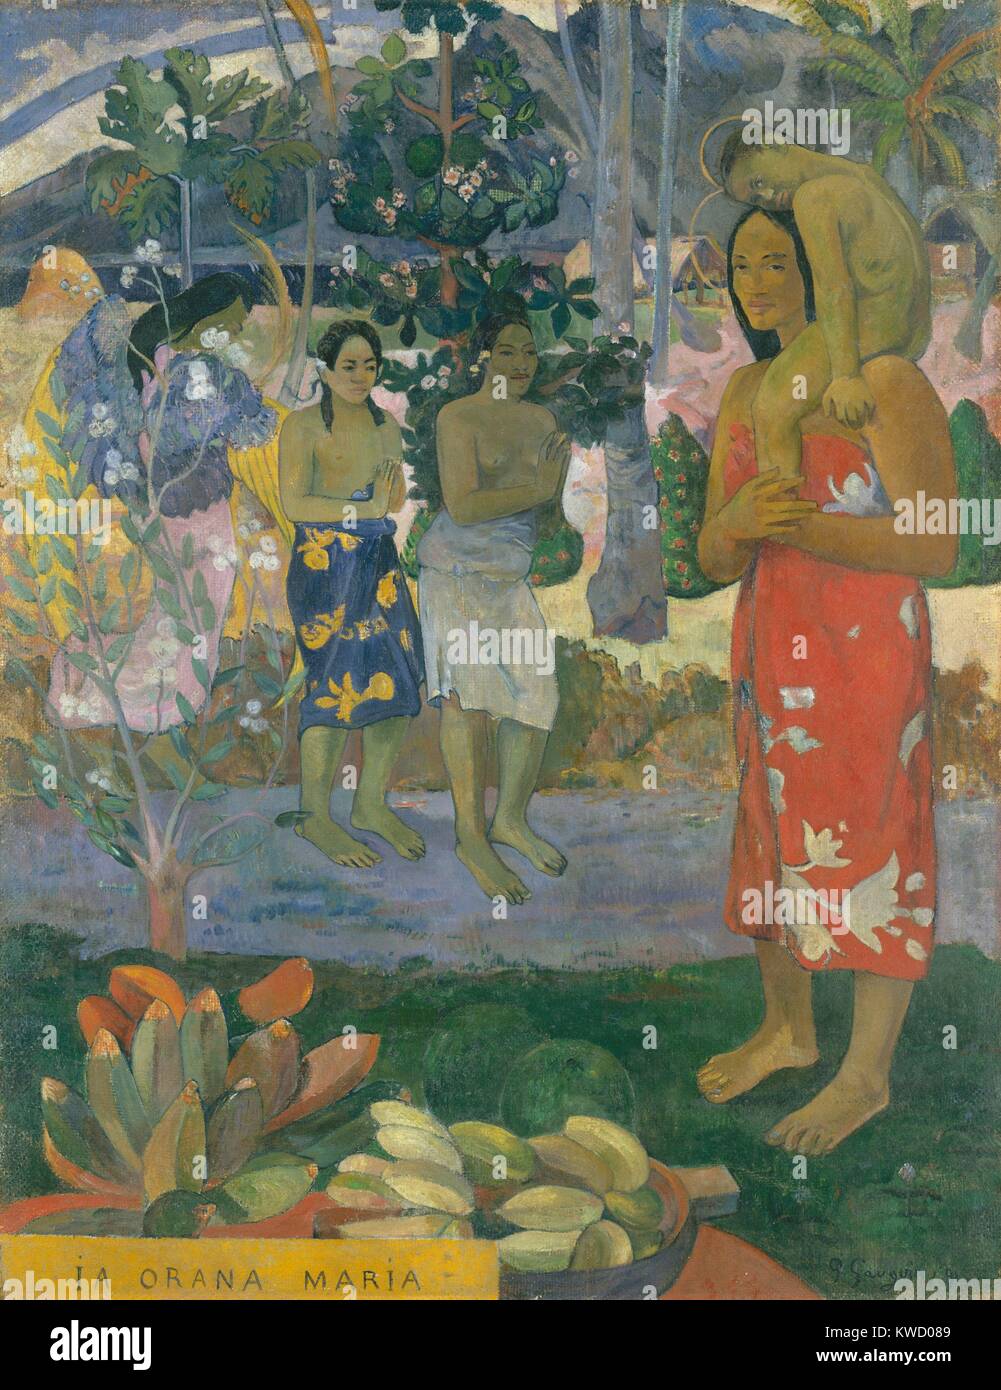 Hail Mary (Ia Orana Maria), by Paul Gauguin, 1891, French Post-Impressionist painting, oil on canvas. Gauguin devoted this first major Tahitian canvas, to a Christian theme, with an angel with yellow wings revealing a Tahitian Mary and Jesus, to island wo (BSLOC 2017 5 28) Stock Photo